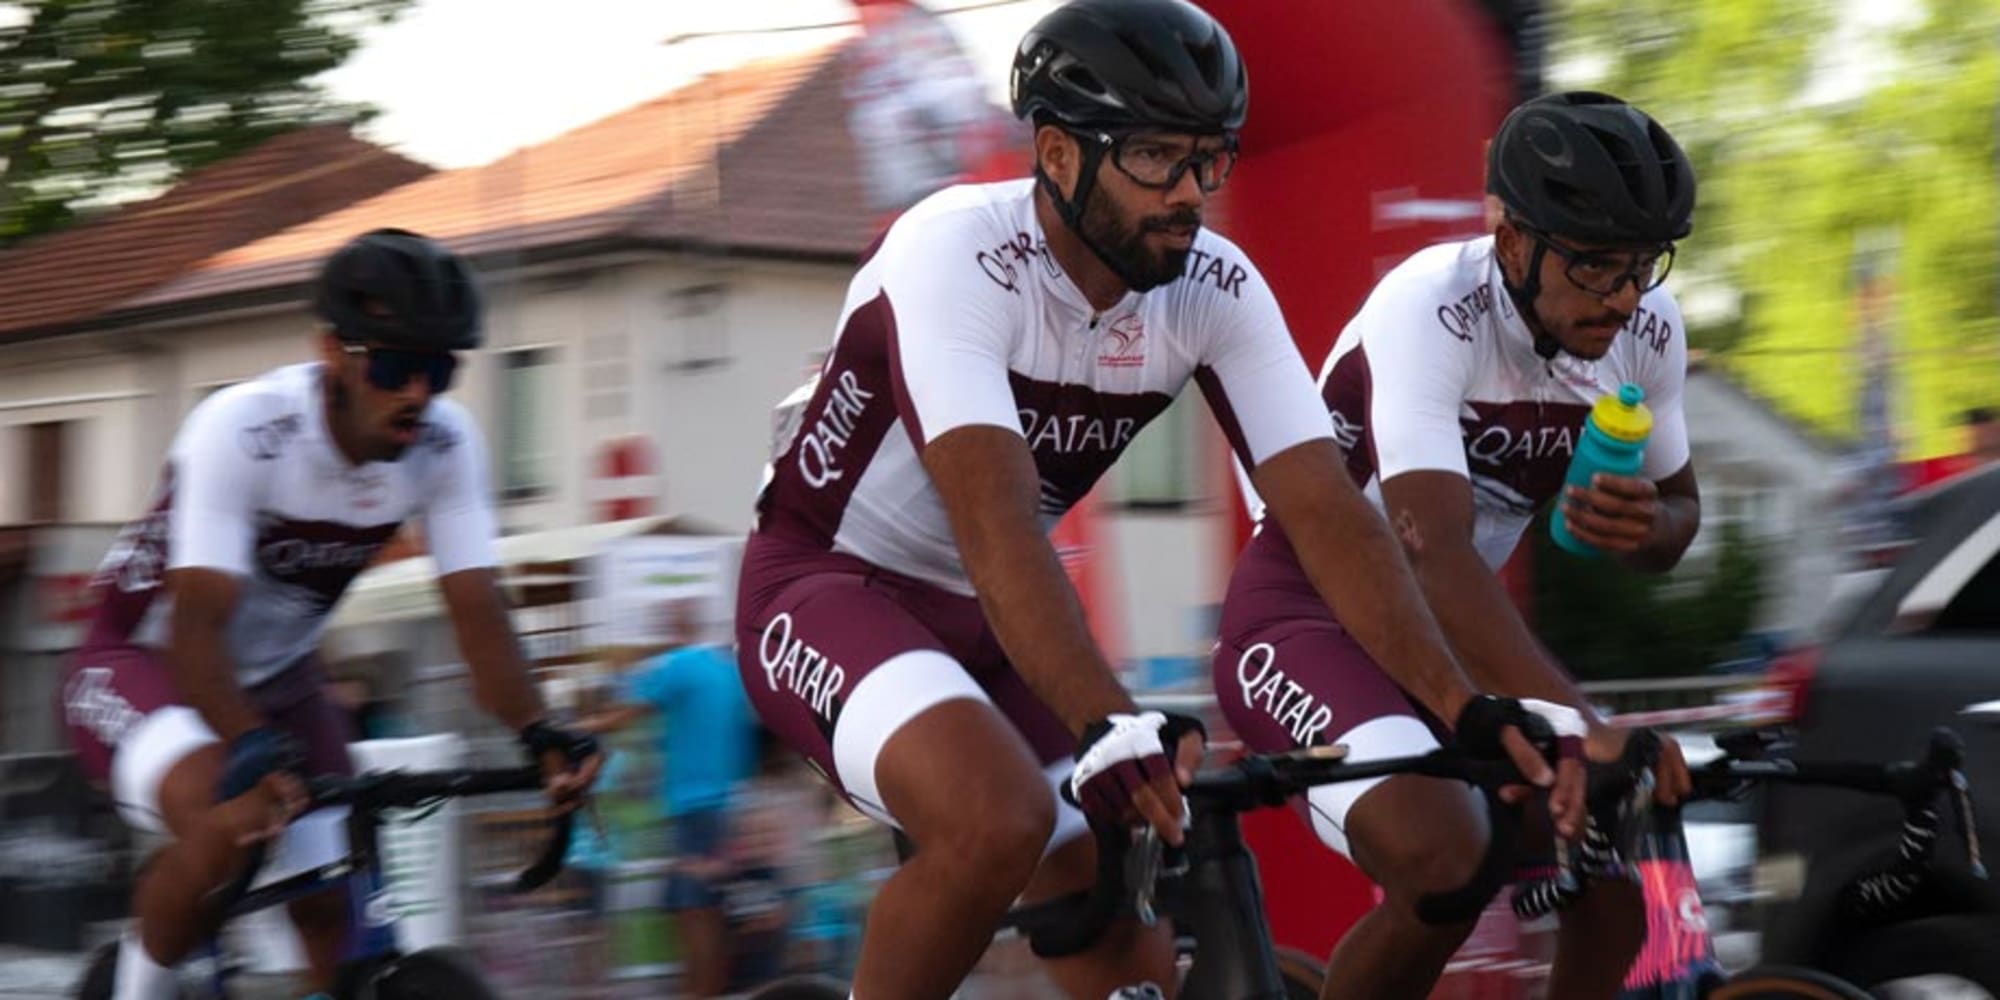 Elite Cycling development in Qatar gathers pace